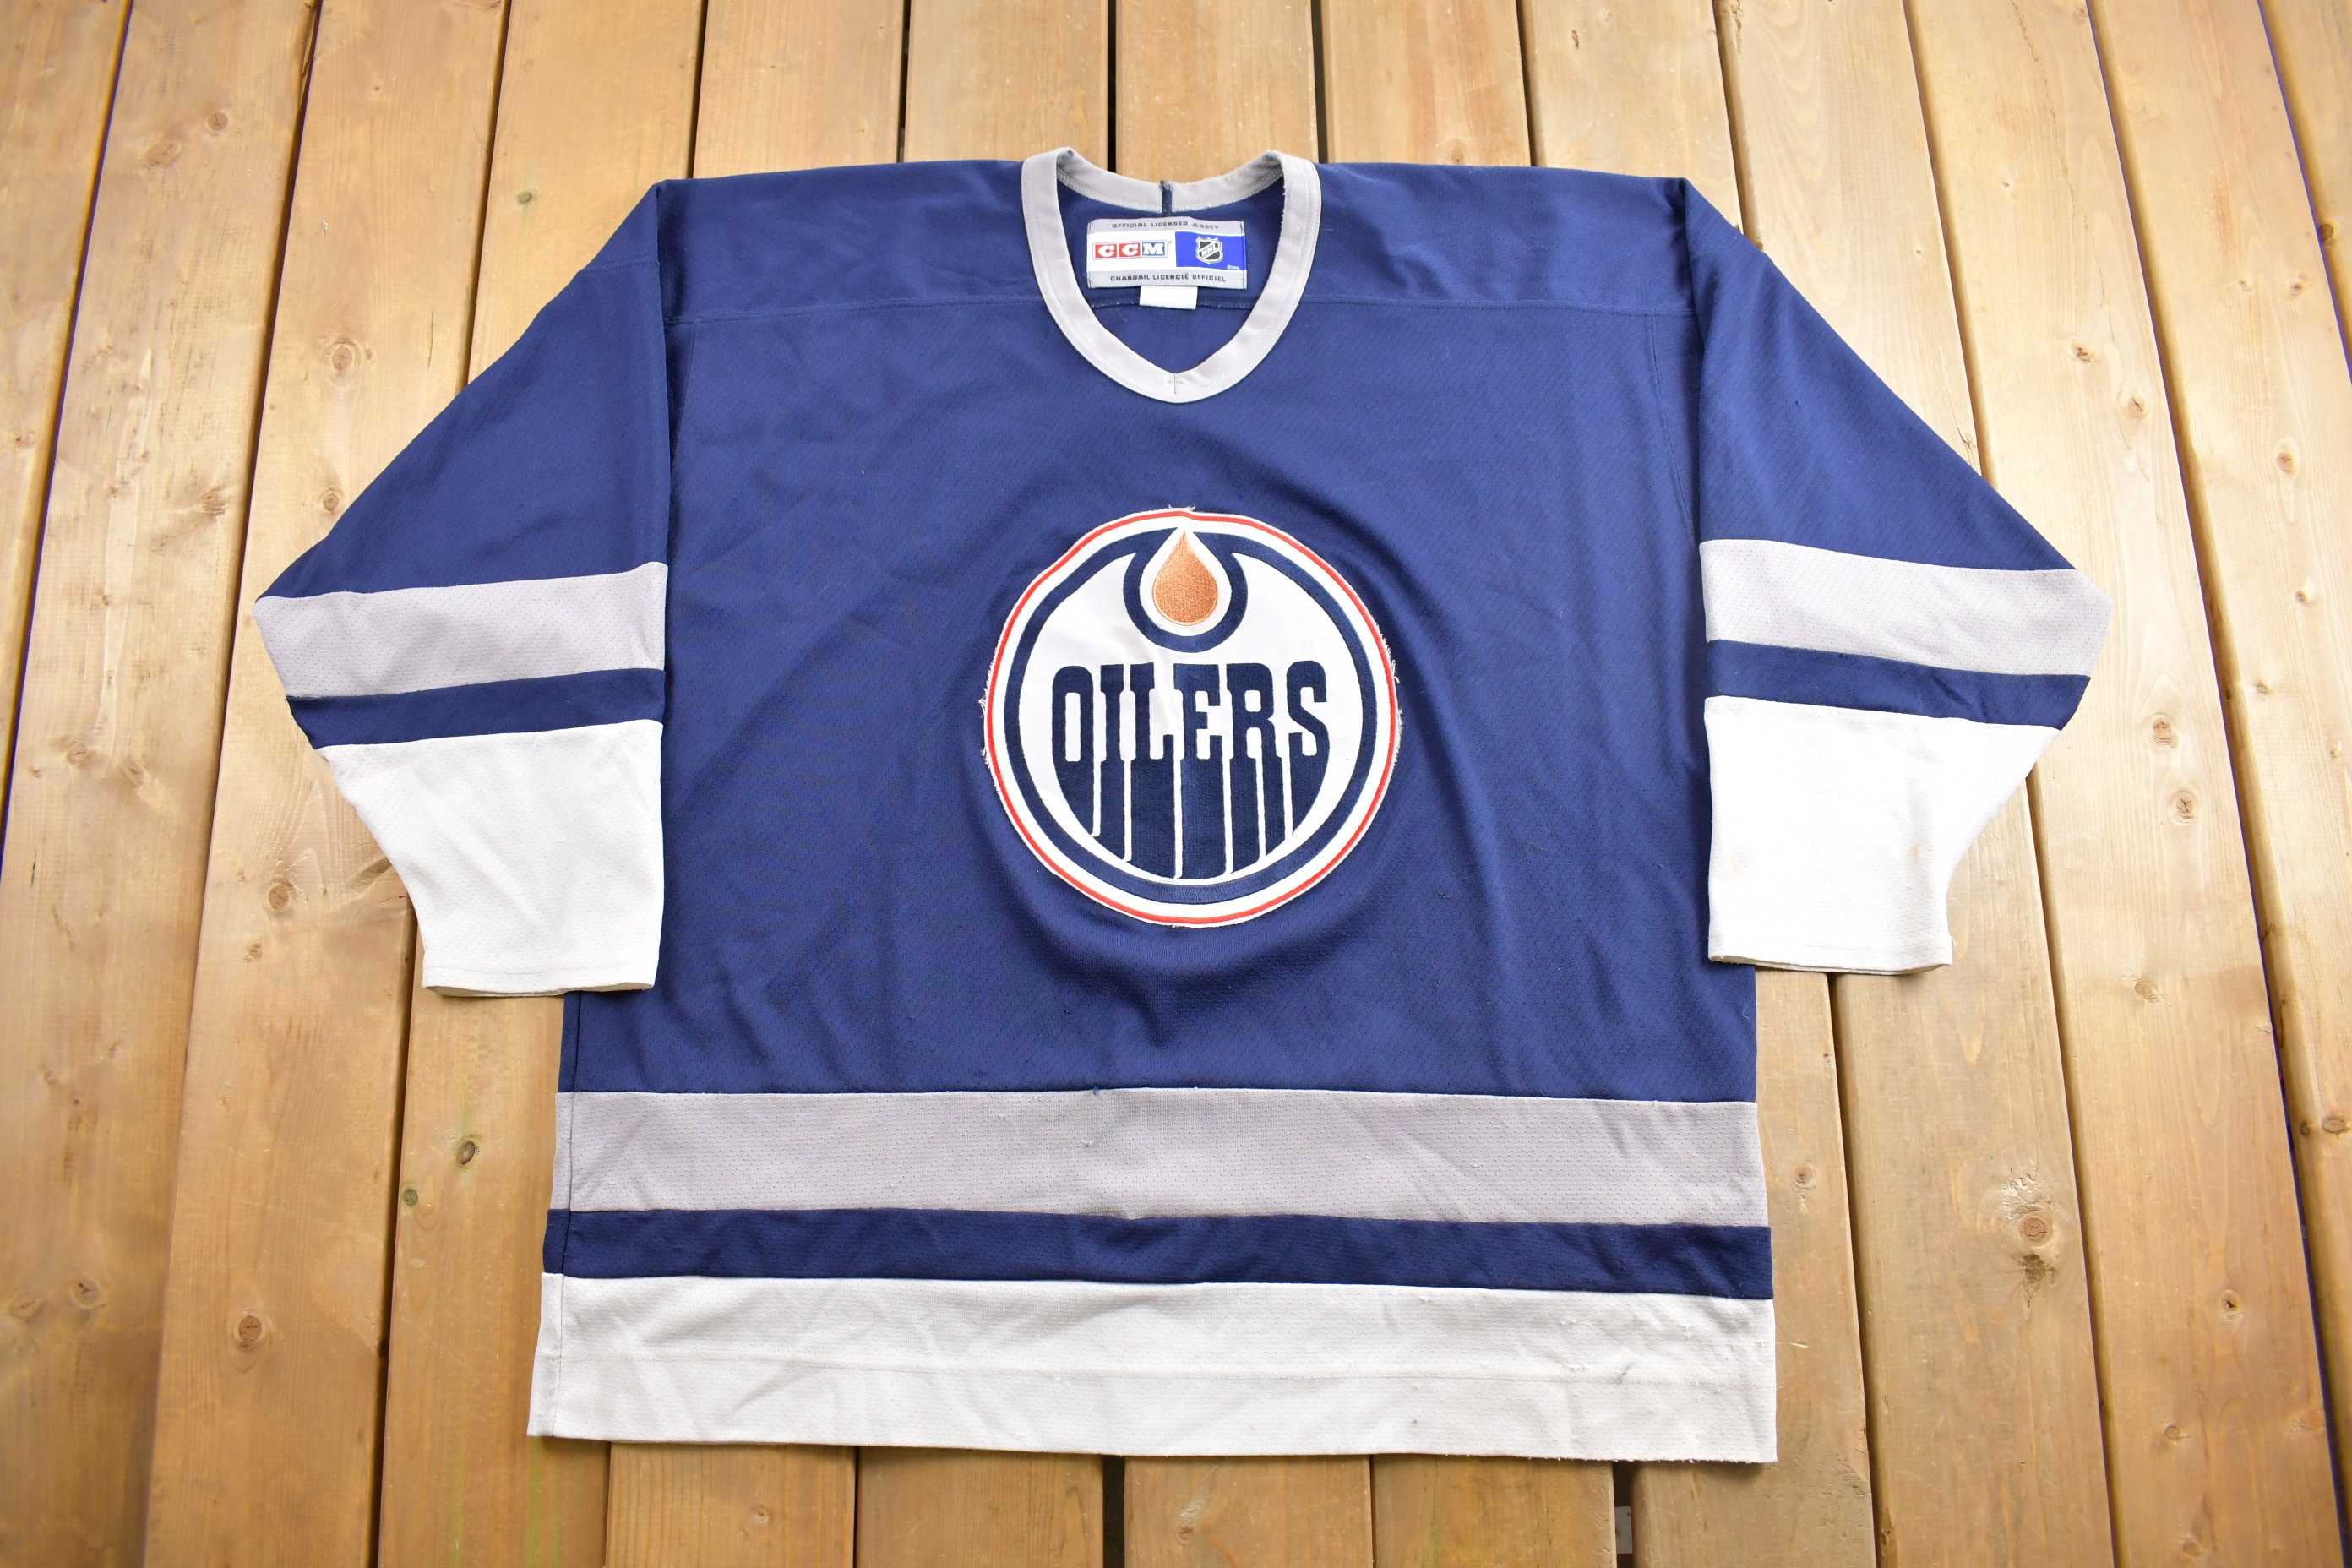 Oilers collectible jersey